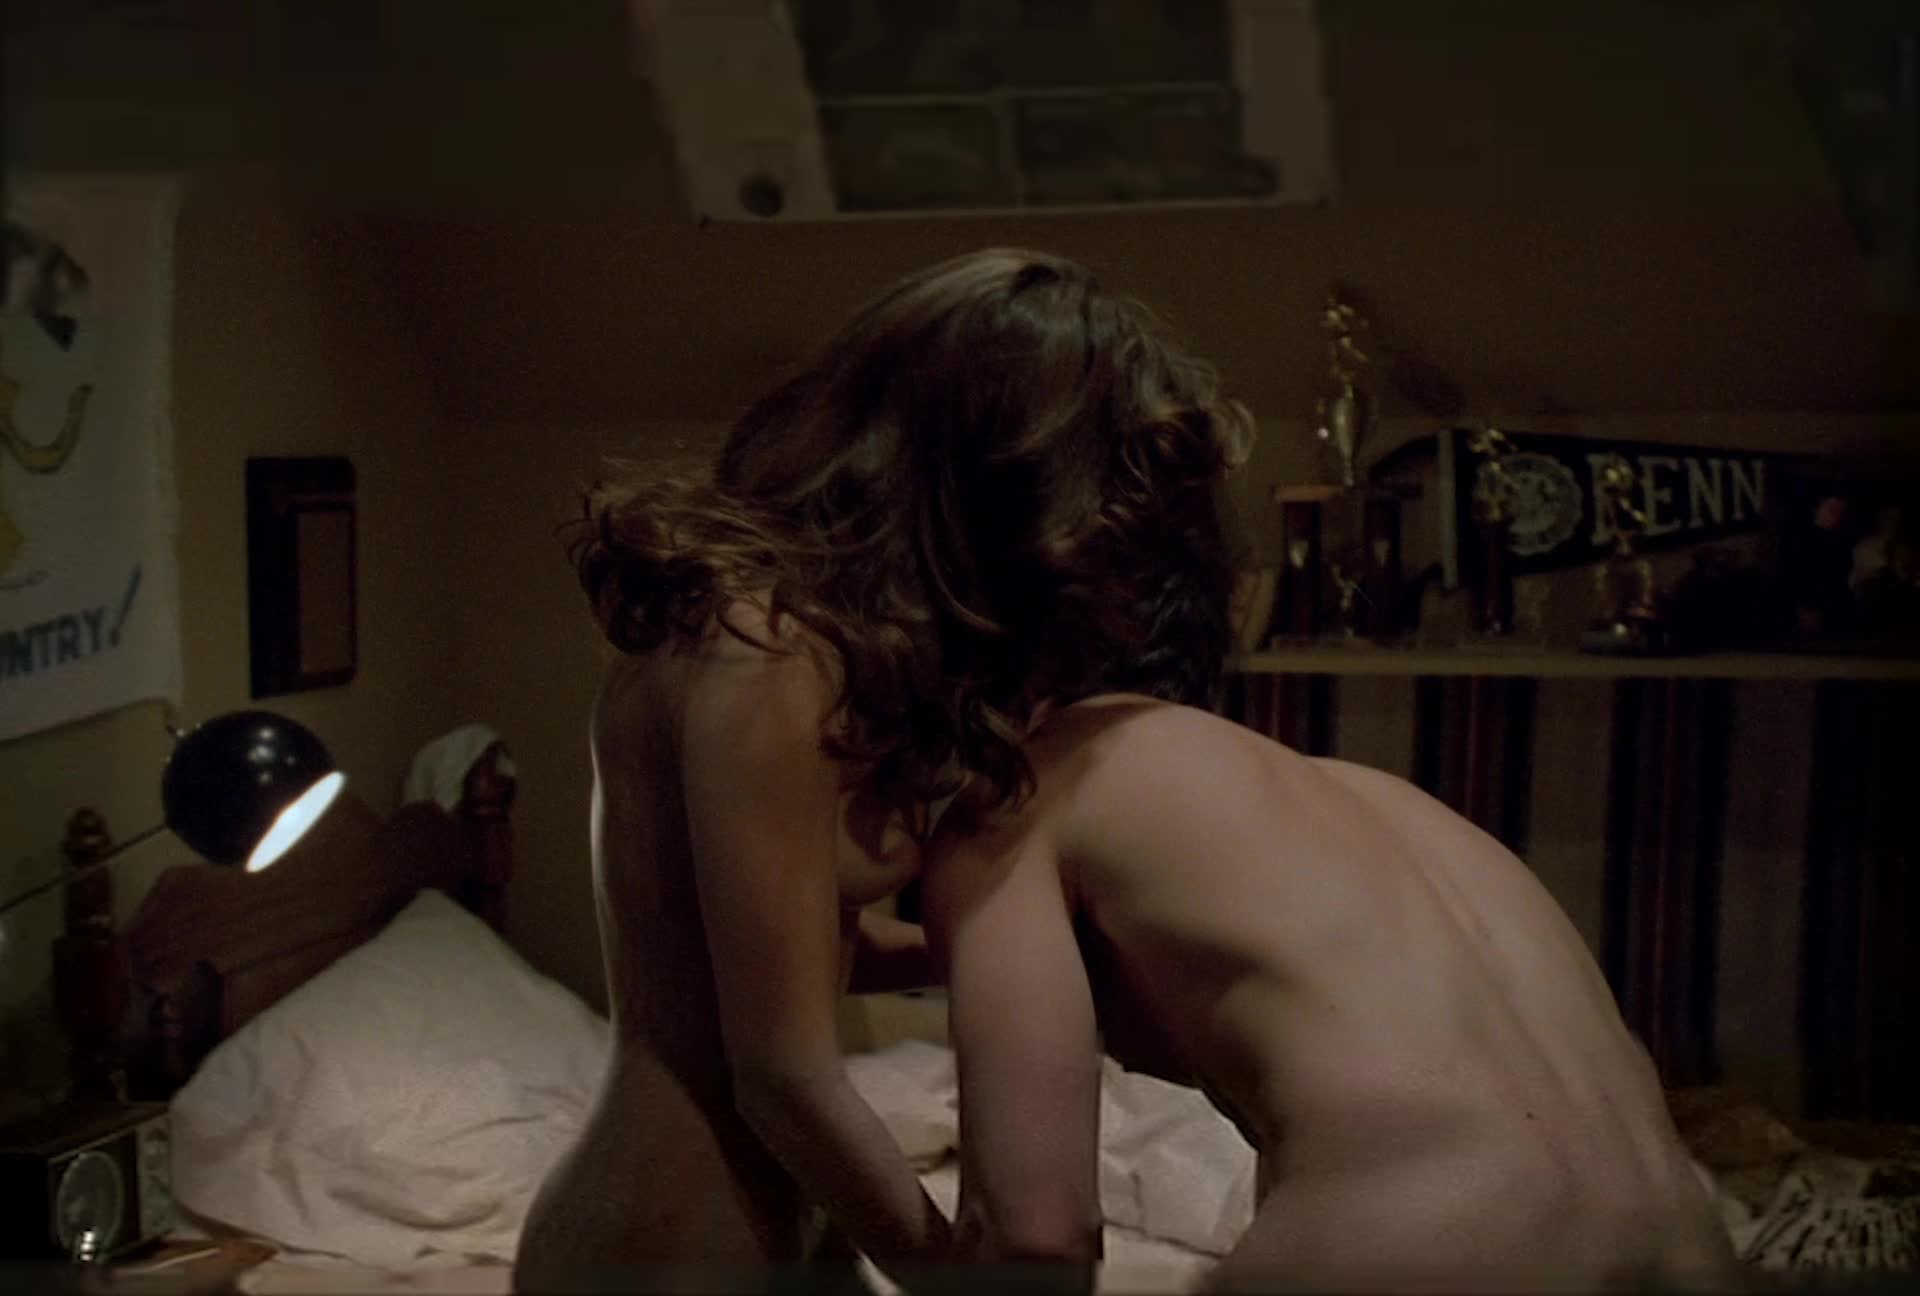 Nude celebs: Lea Thompson's Full frontal in 'All the Right Moves&...